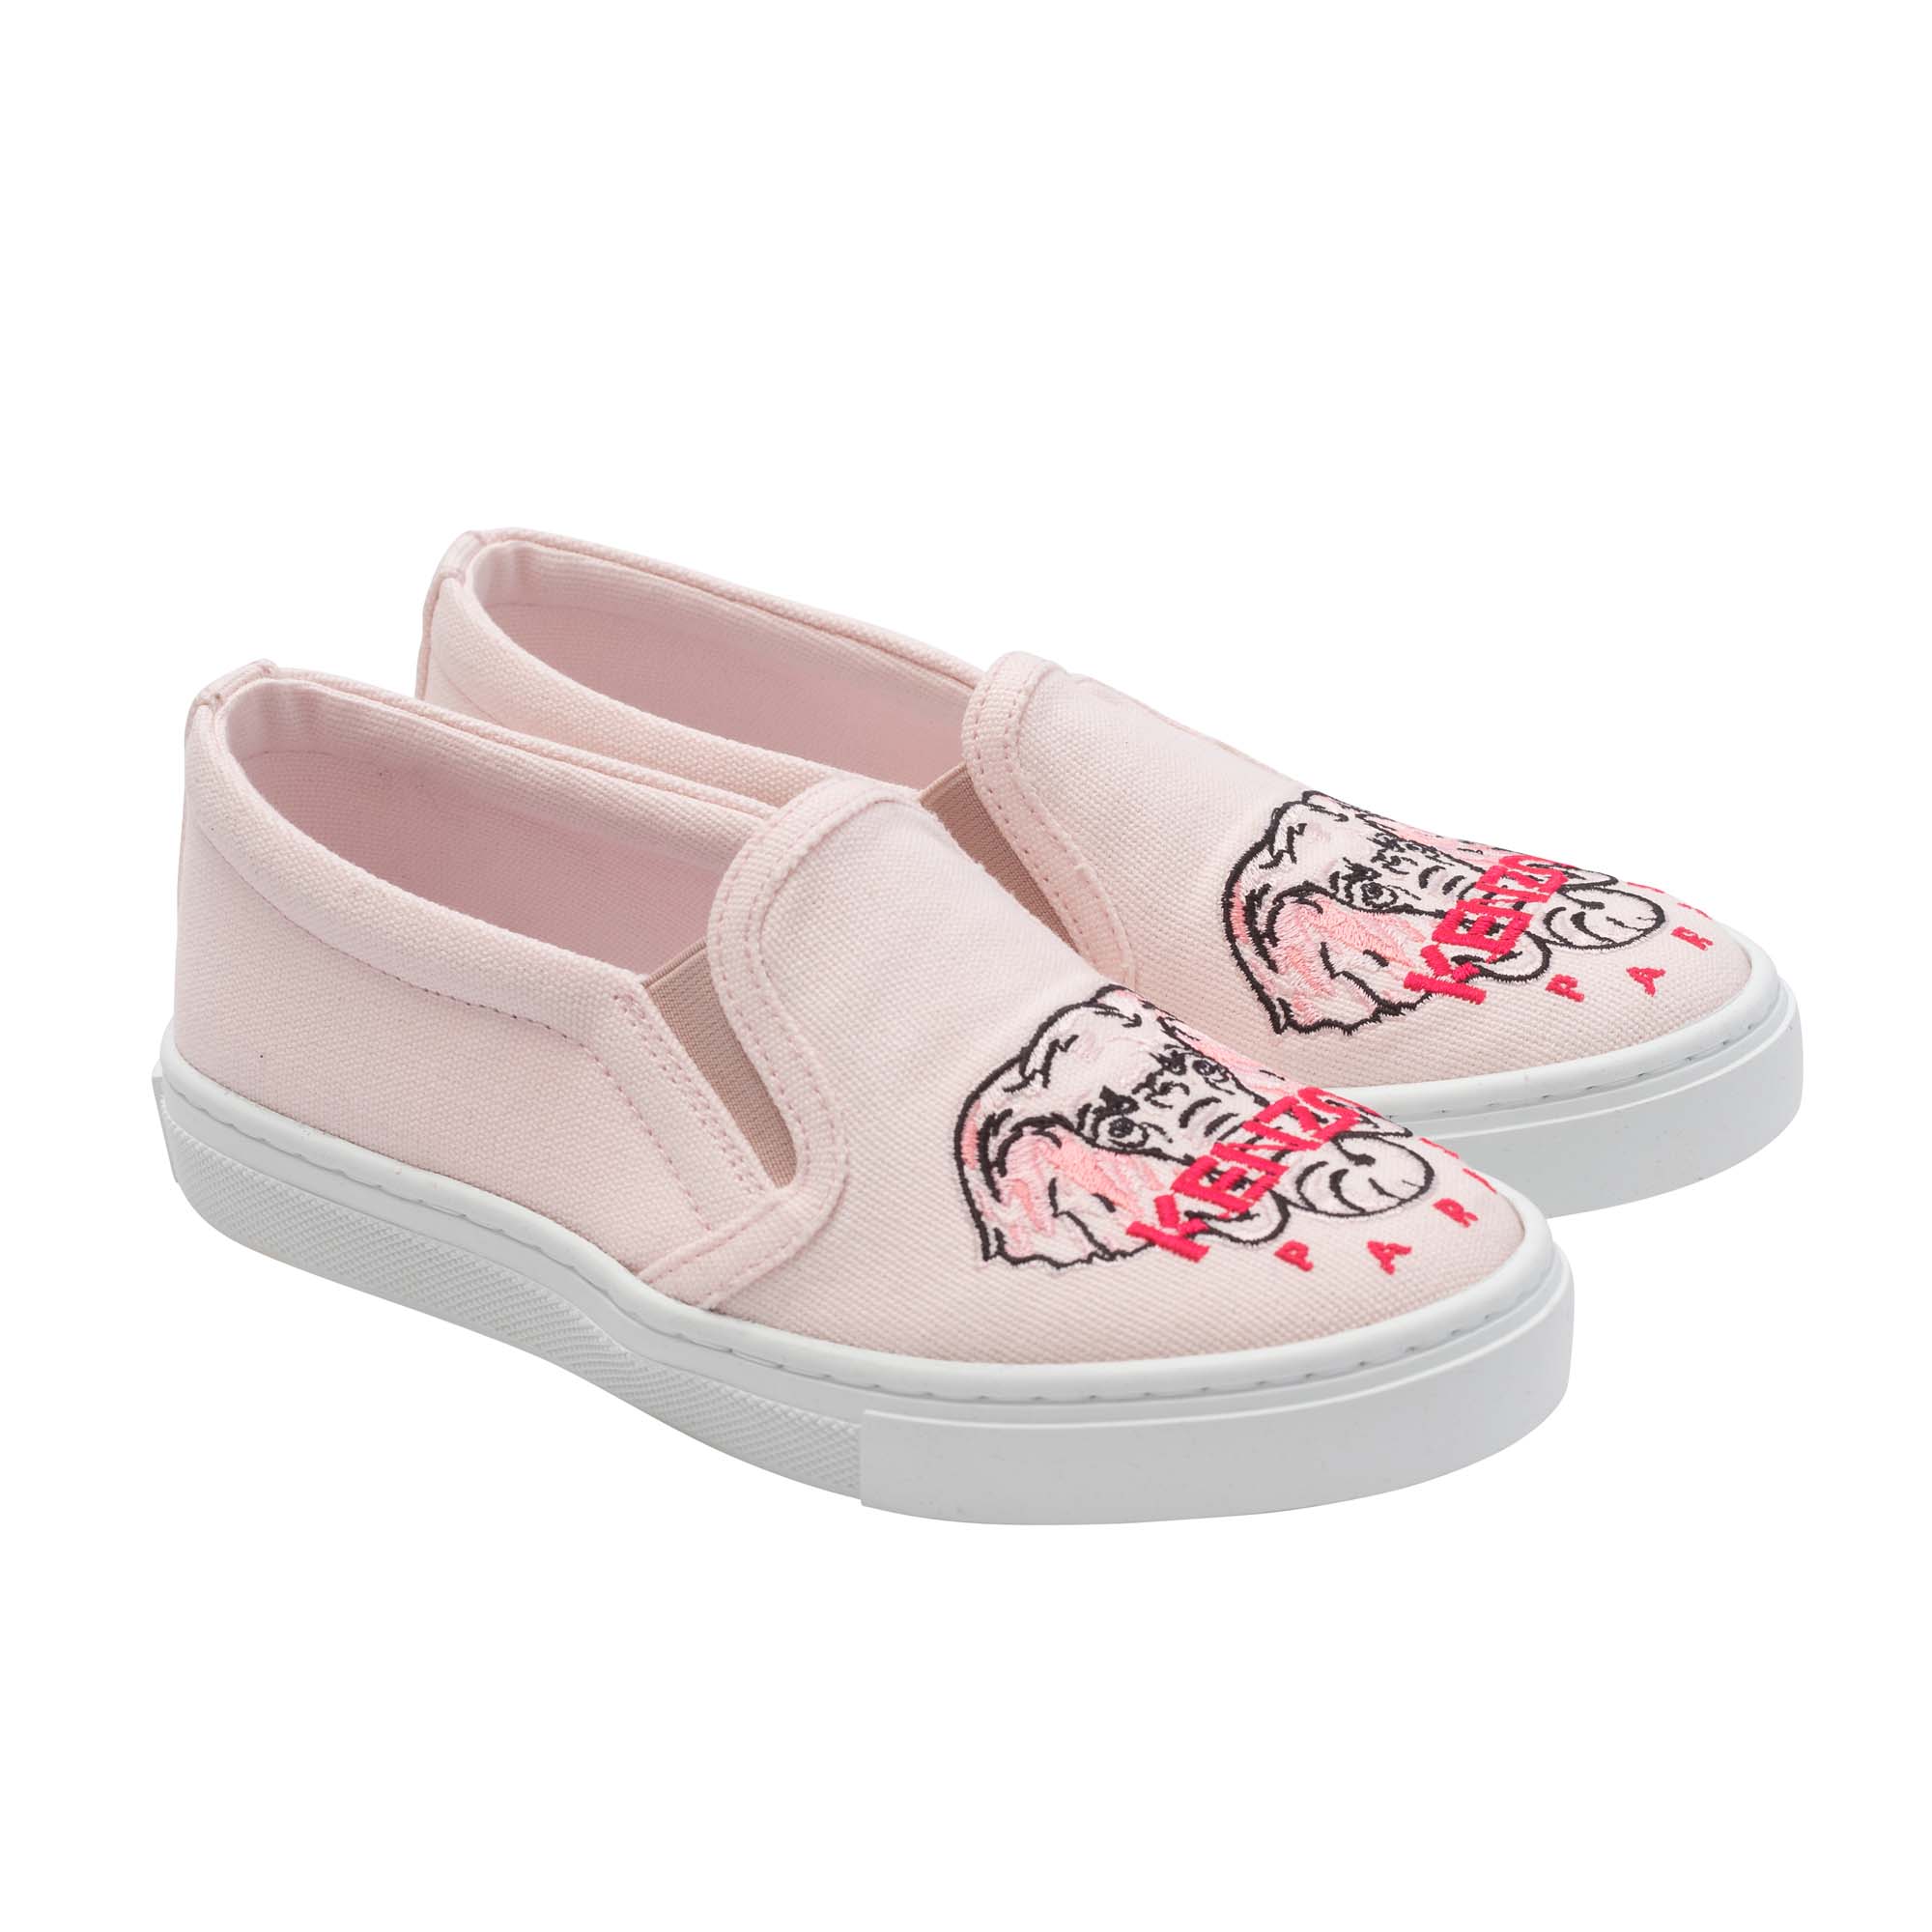 KENZO KIDS Chaussures FILLE 25 Rose